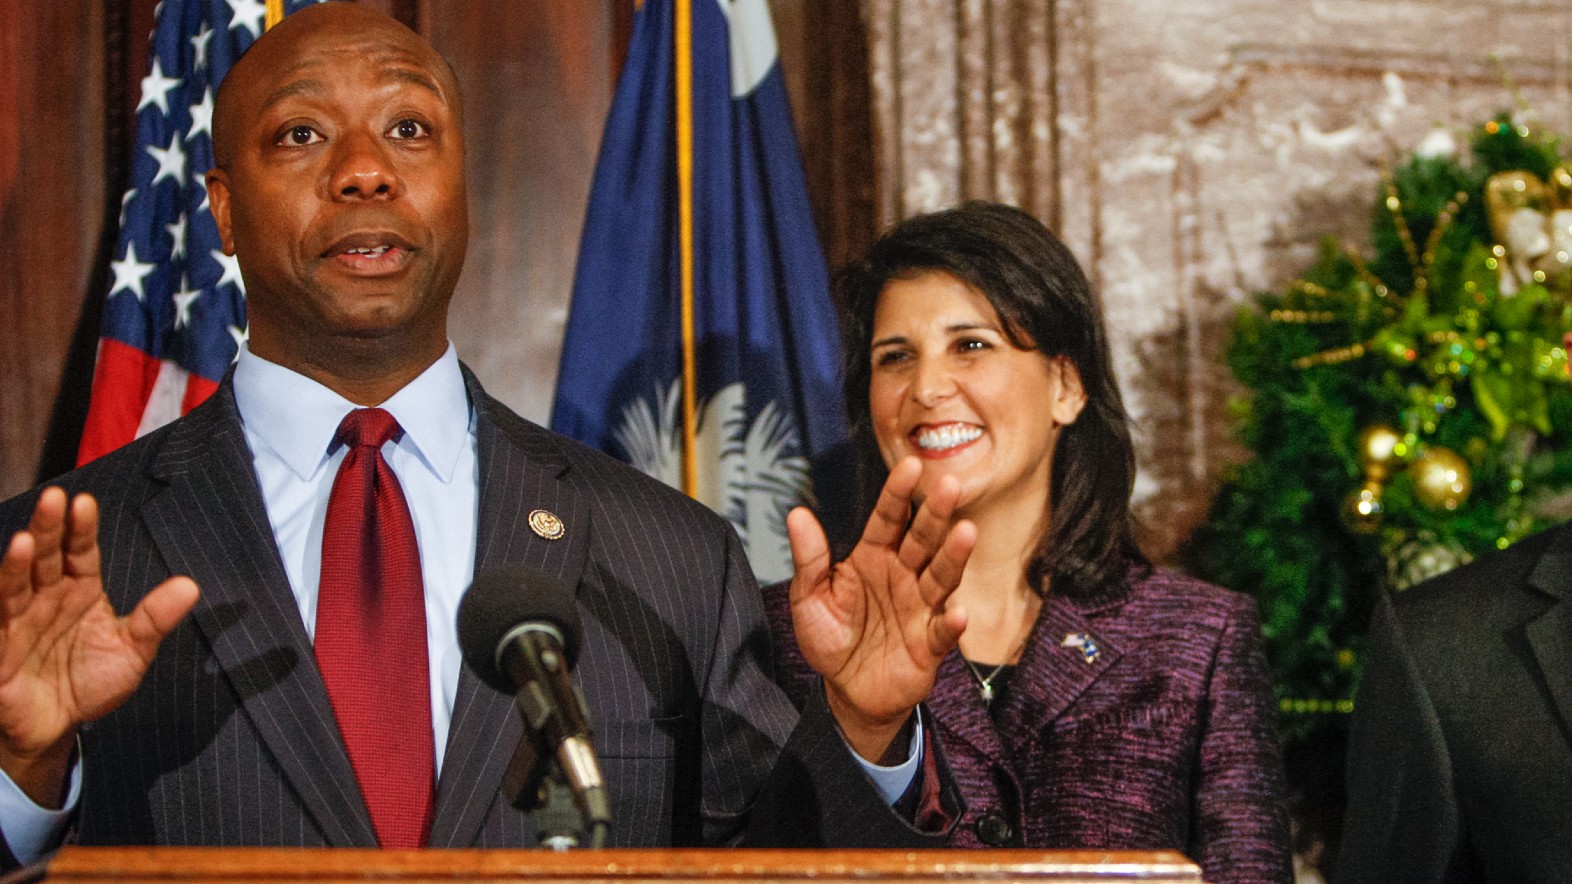 CNN panel angered by Republicans Tim Scott and Nikki Haley’s denial of ‘systemic racism’.